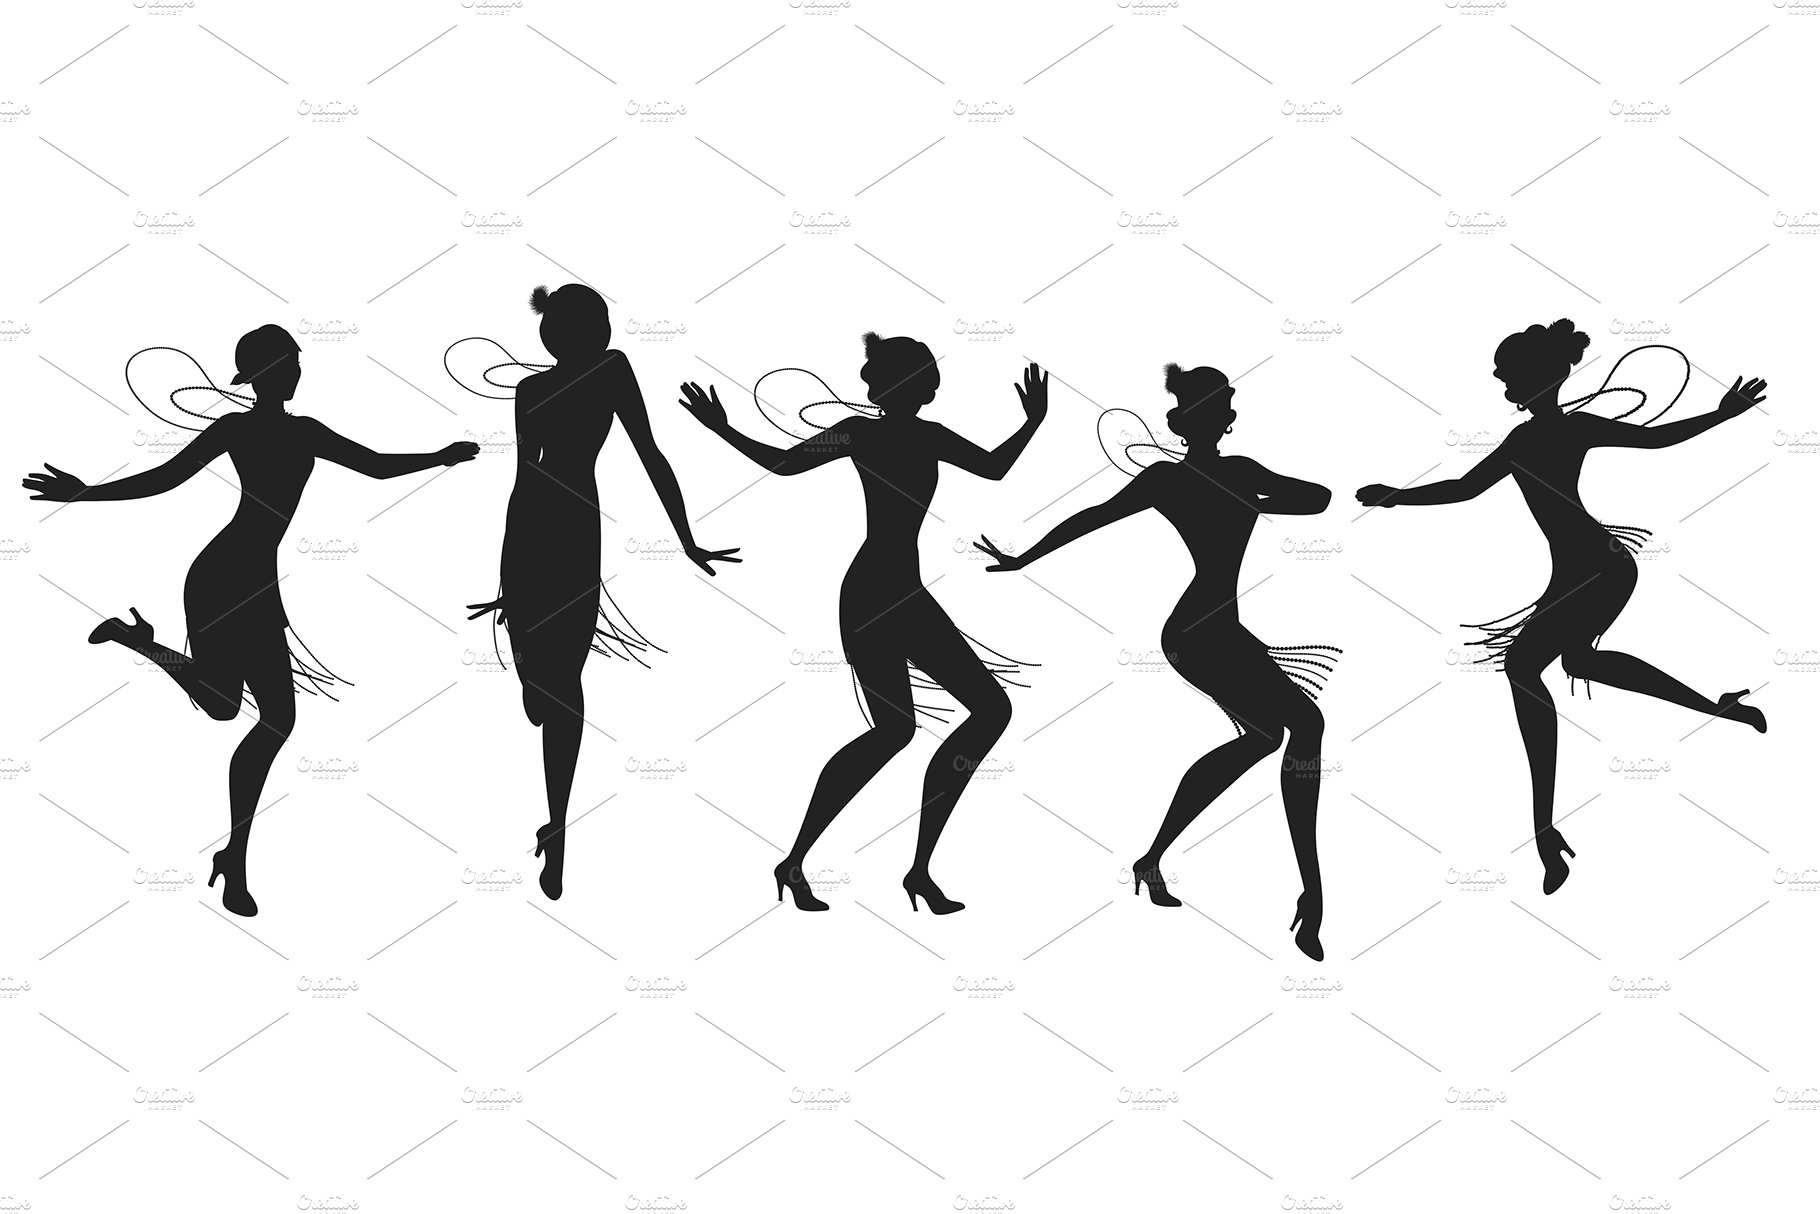 Five Flappers Dancing Charleston III cover image.